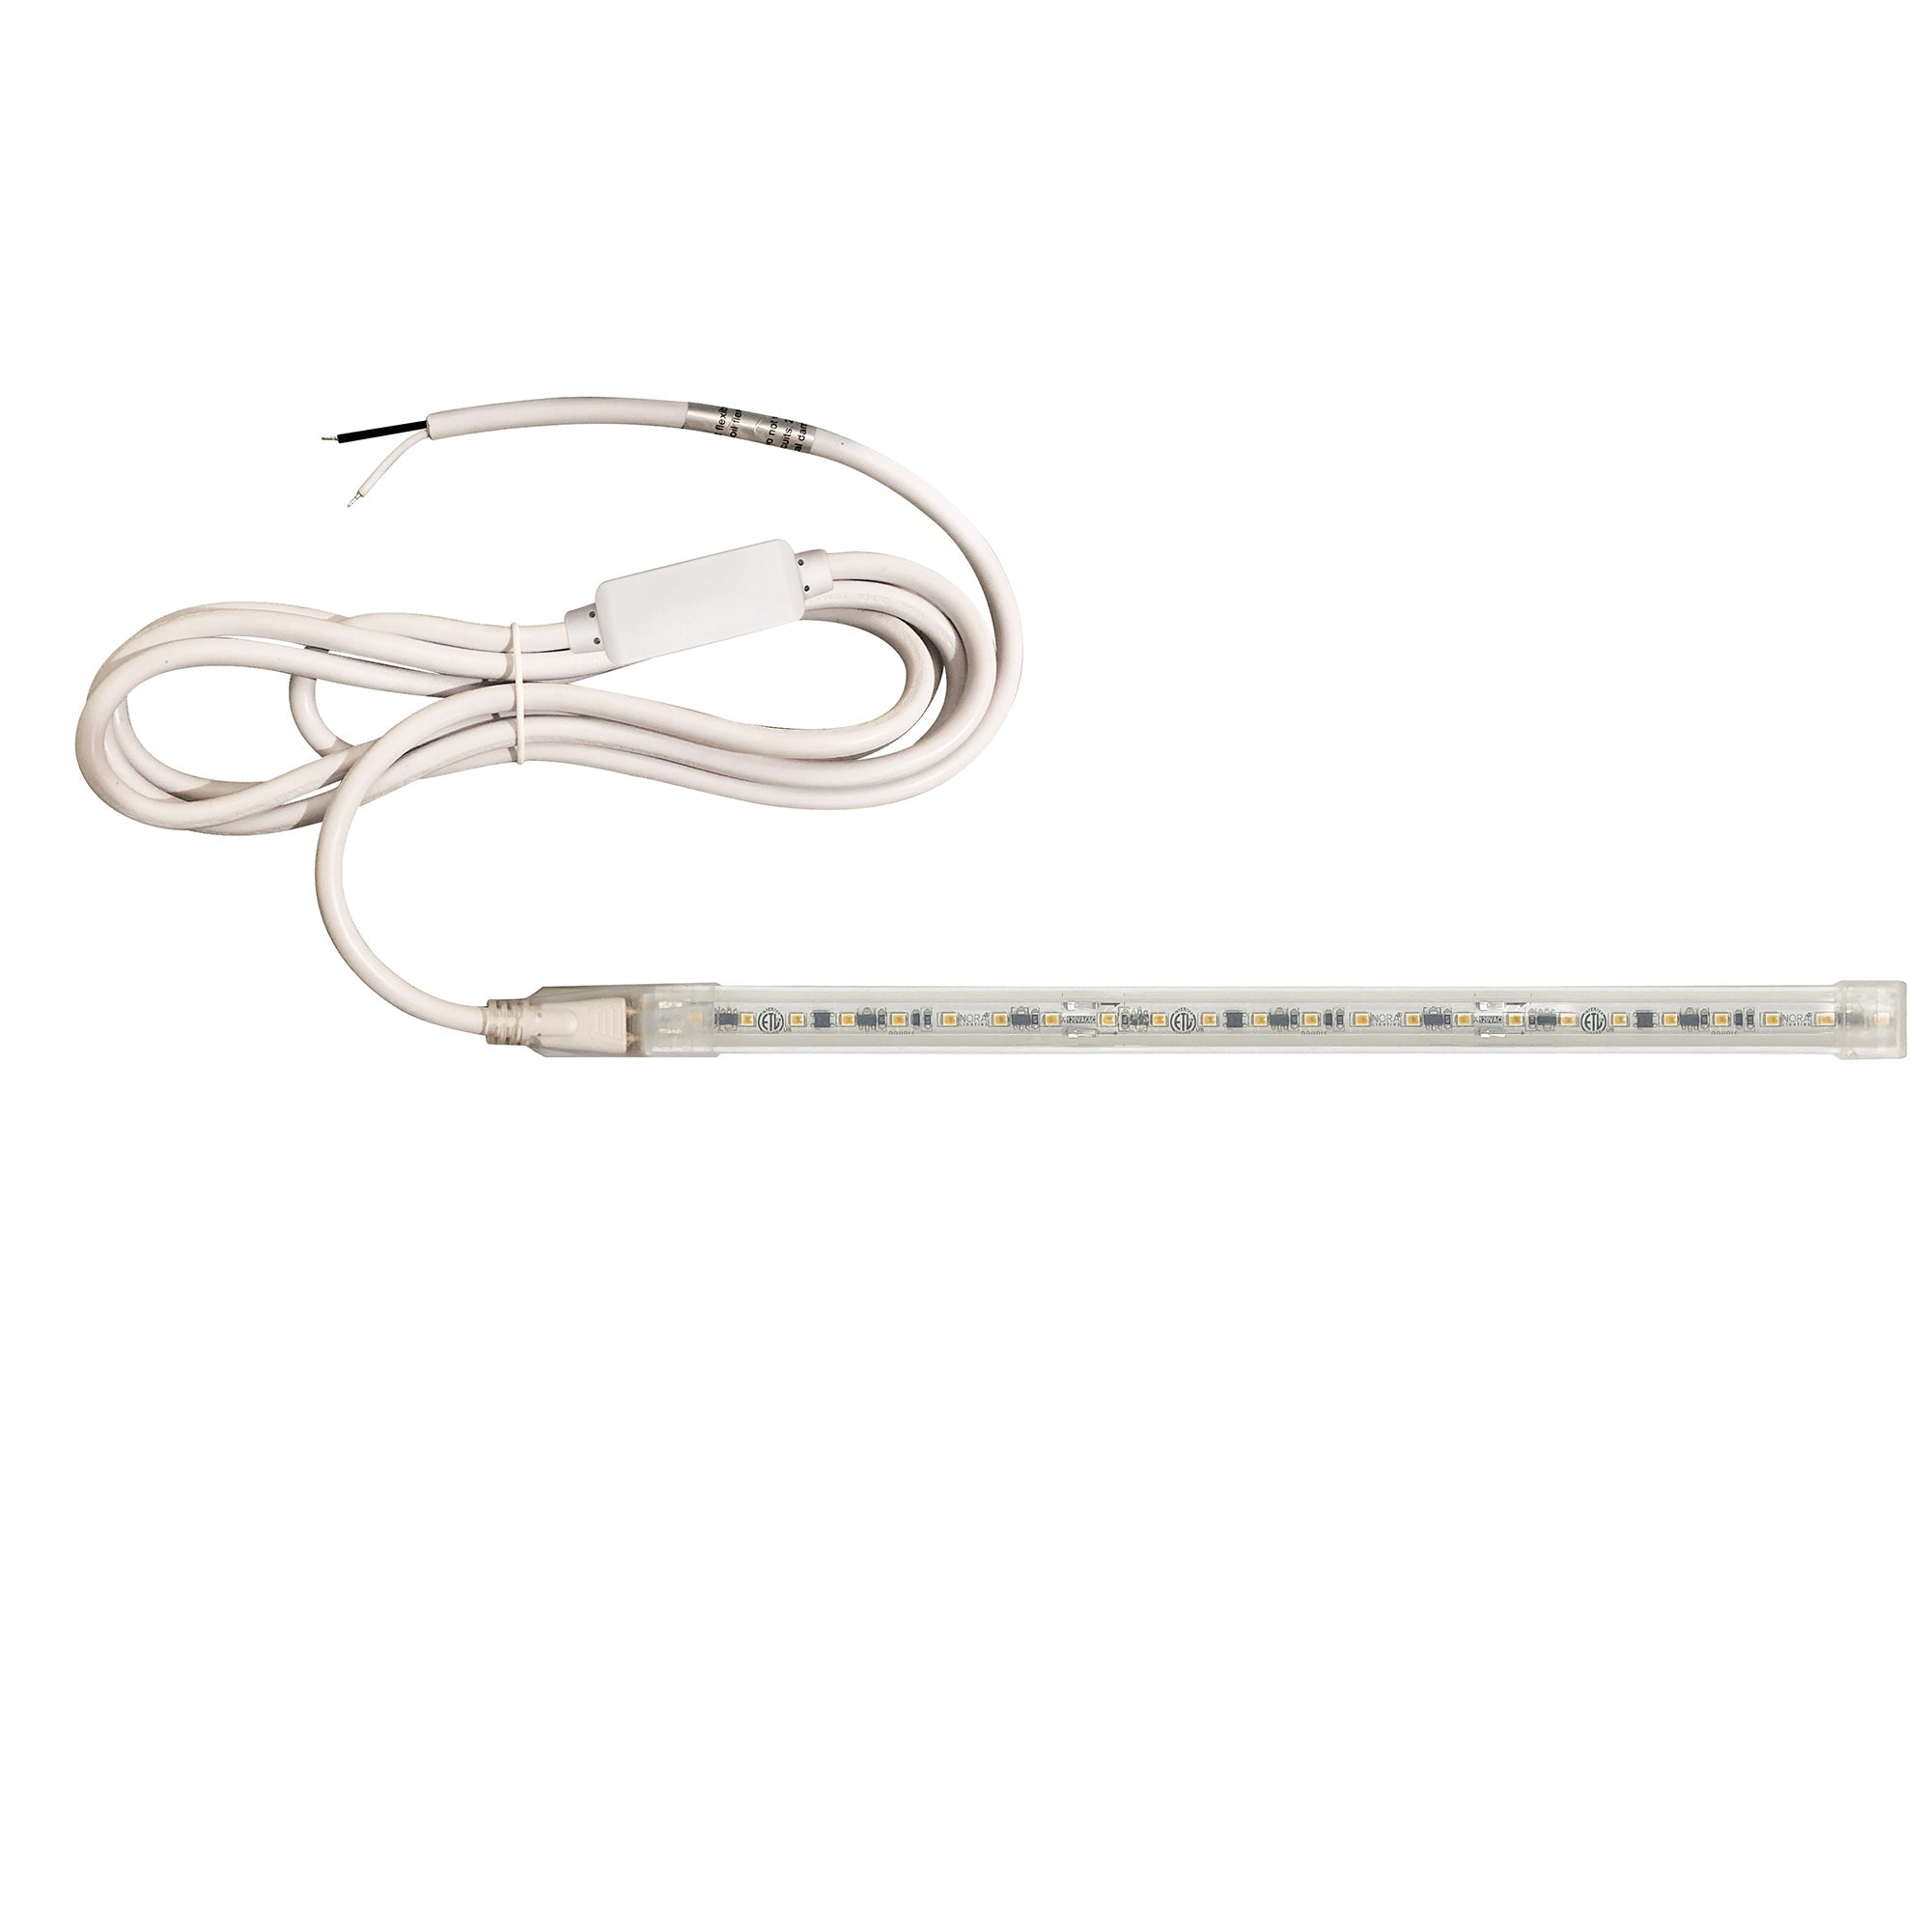 Nora Lighting NUTP13-W59-4-12-930/HWSP - Accent / Undercabinet - Custom Cut 59-ft, 4-in 120V Continuous LED Tape Light, 330lm / 3.6W per foot, 3000K, w/ Mounting Clips and 8' Hardwired Power Cord w/ Surge Protector